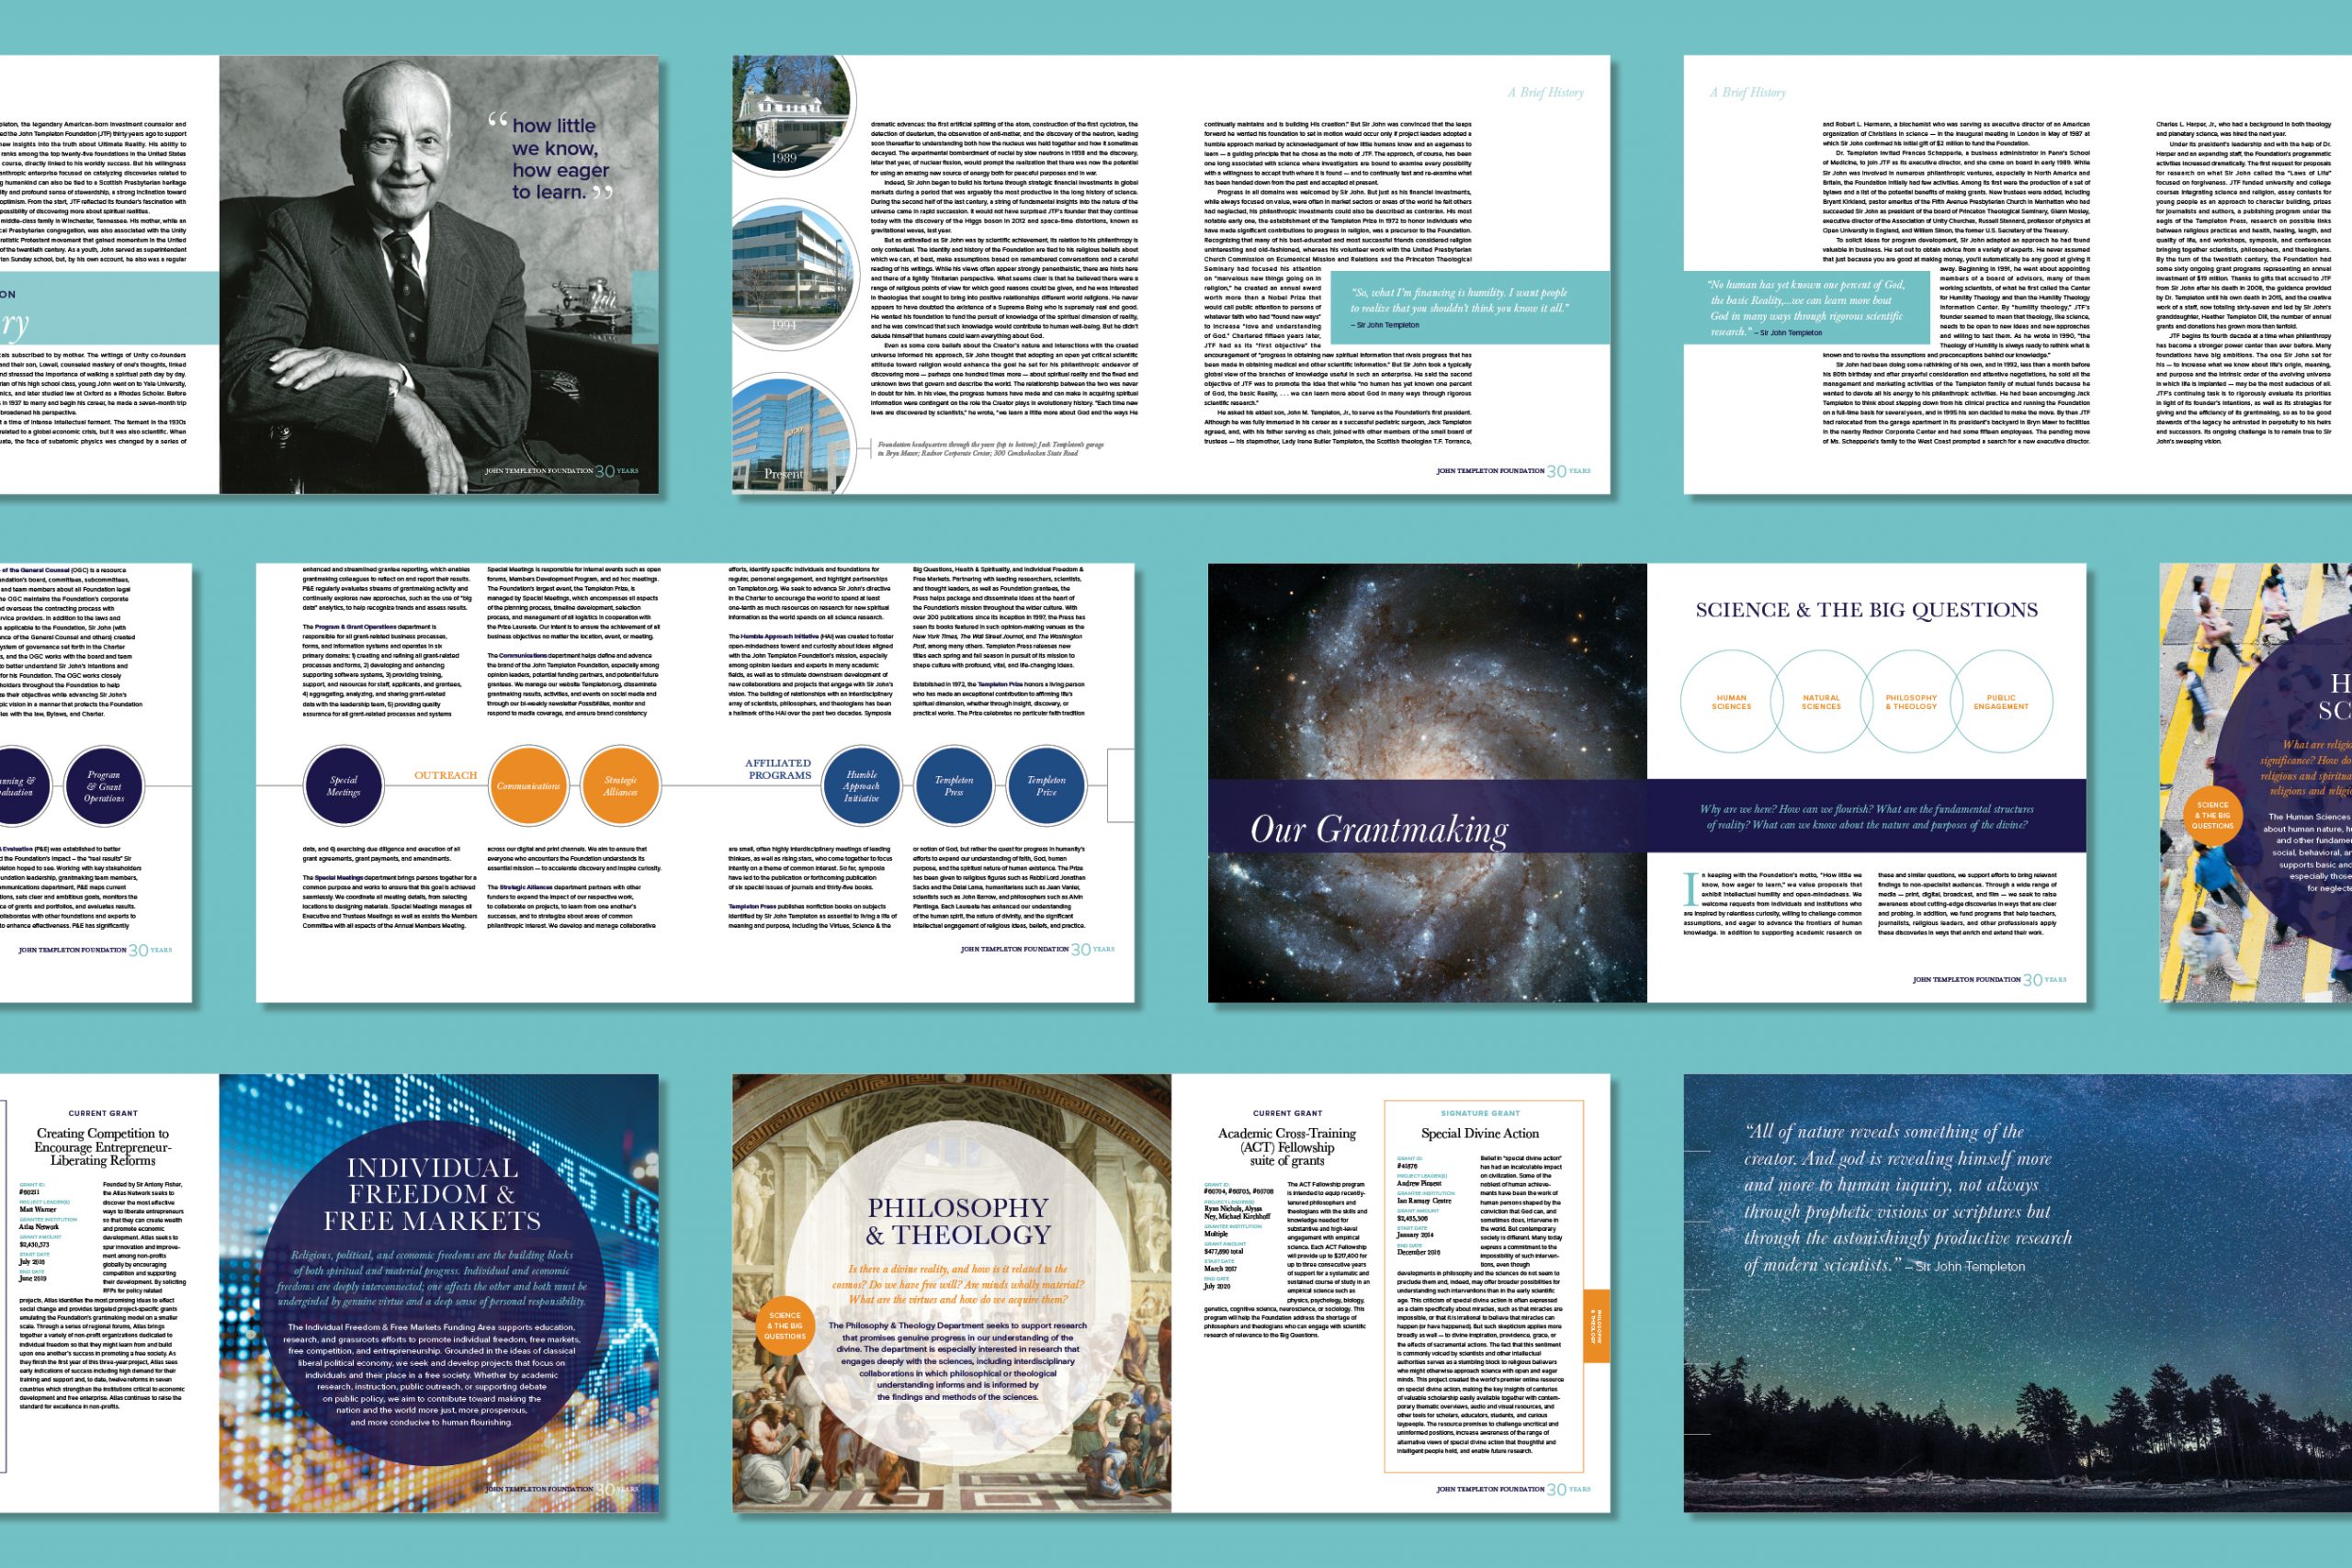 pages from John Templeton Foundation 30 year Anniversary book